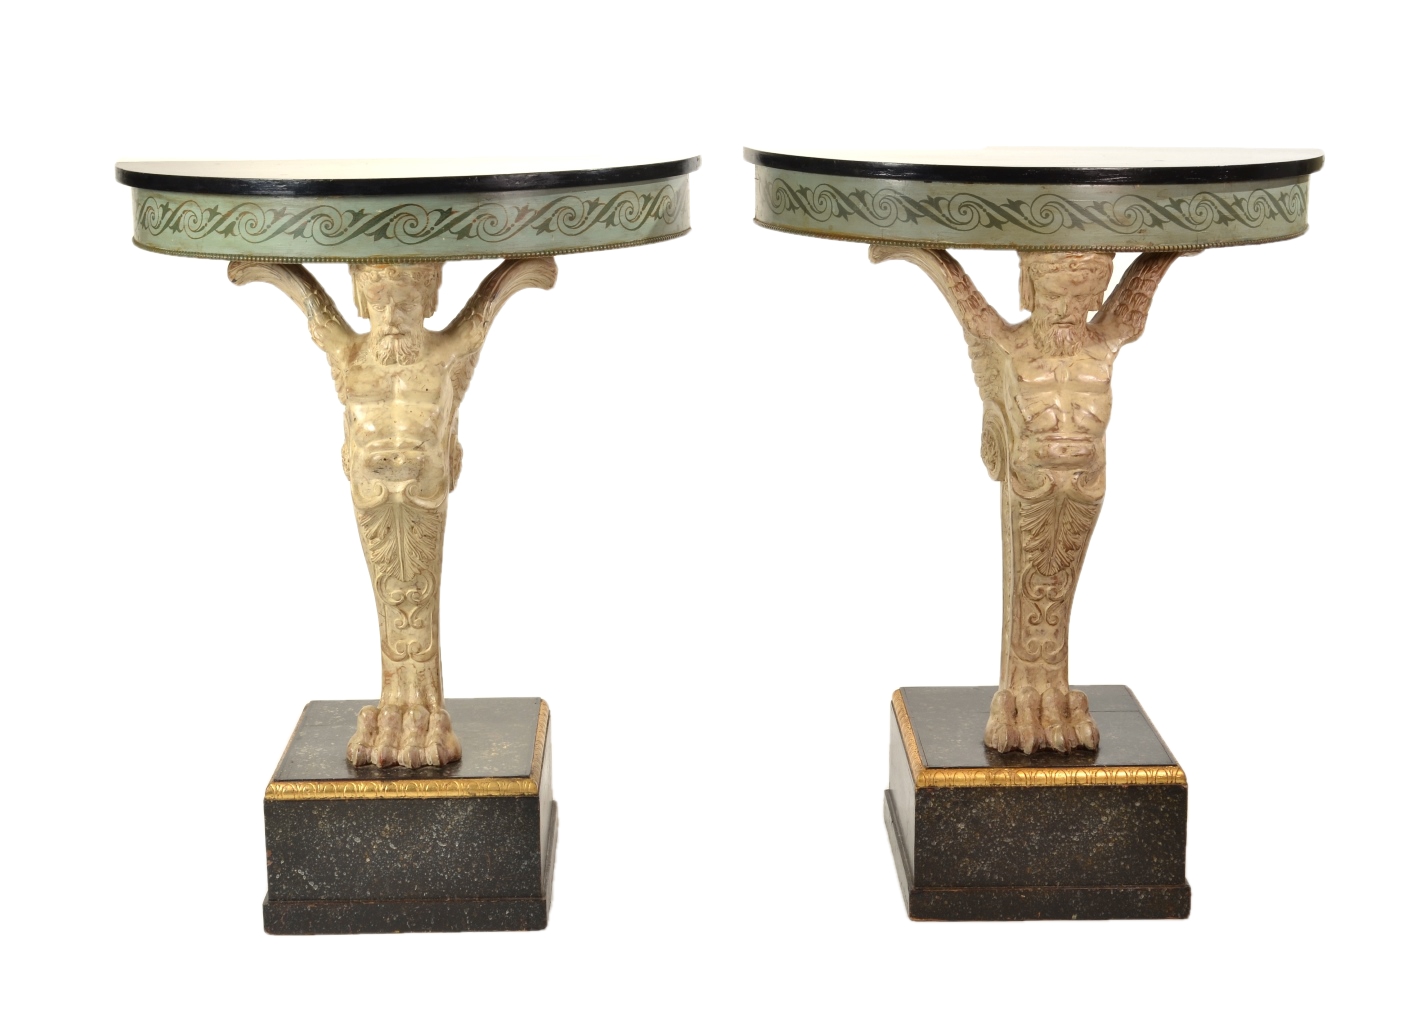 Pair of Carved and Painted Demilune Console Tables, 20th c.